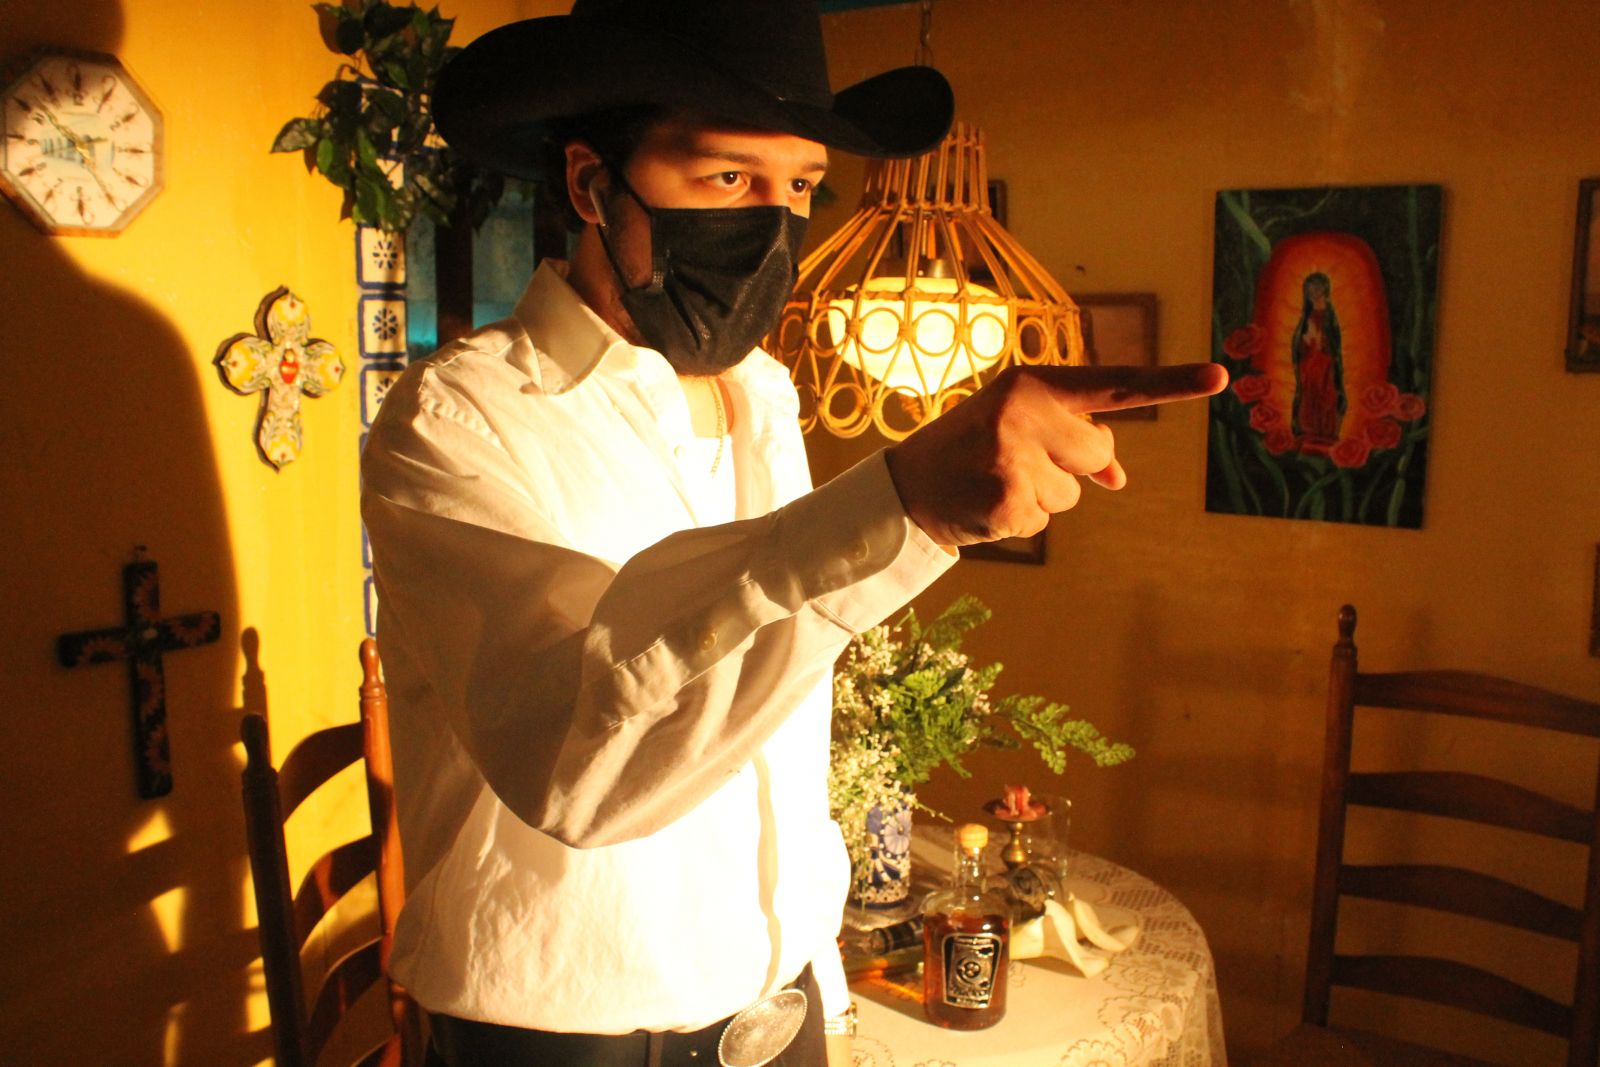 A man wearing a white dress shirt, a black cowboy hat, and a black face mask stands in a room with decorated walls. He points ahead of him.